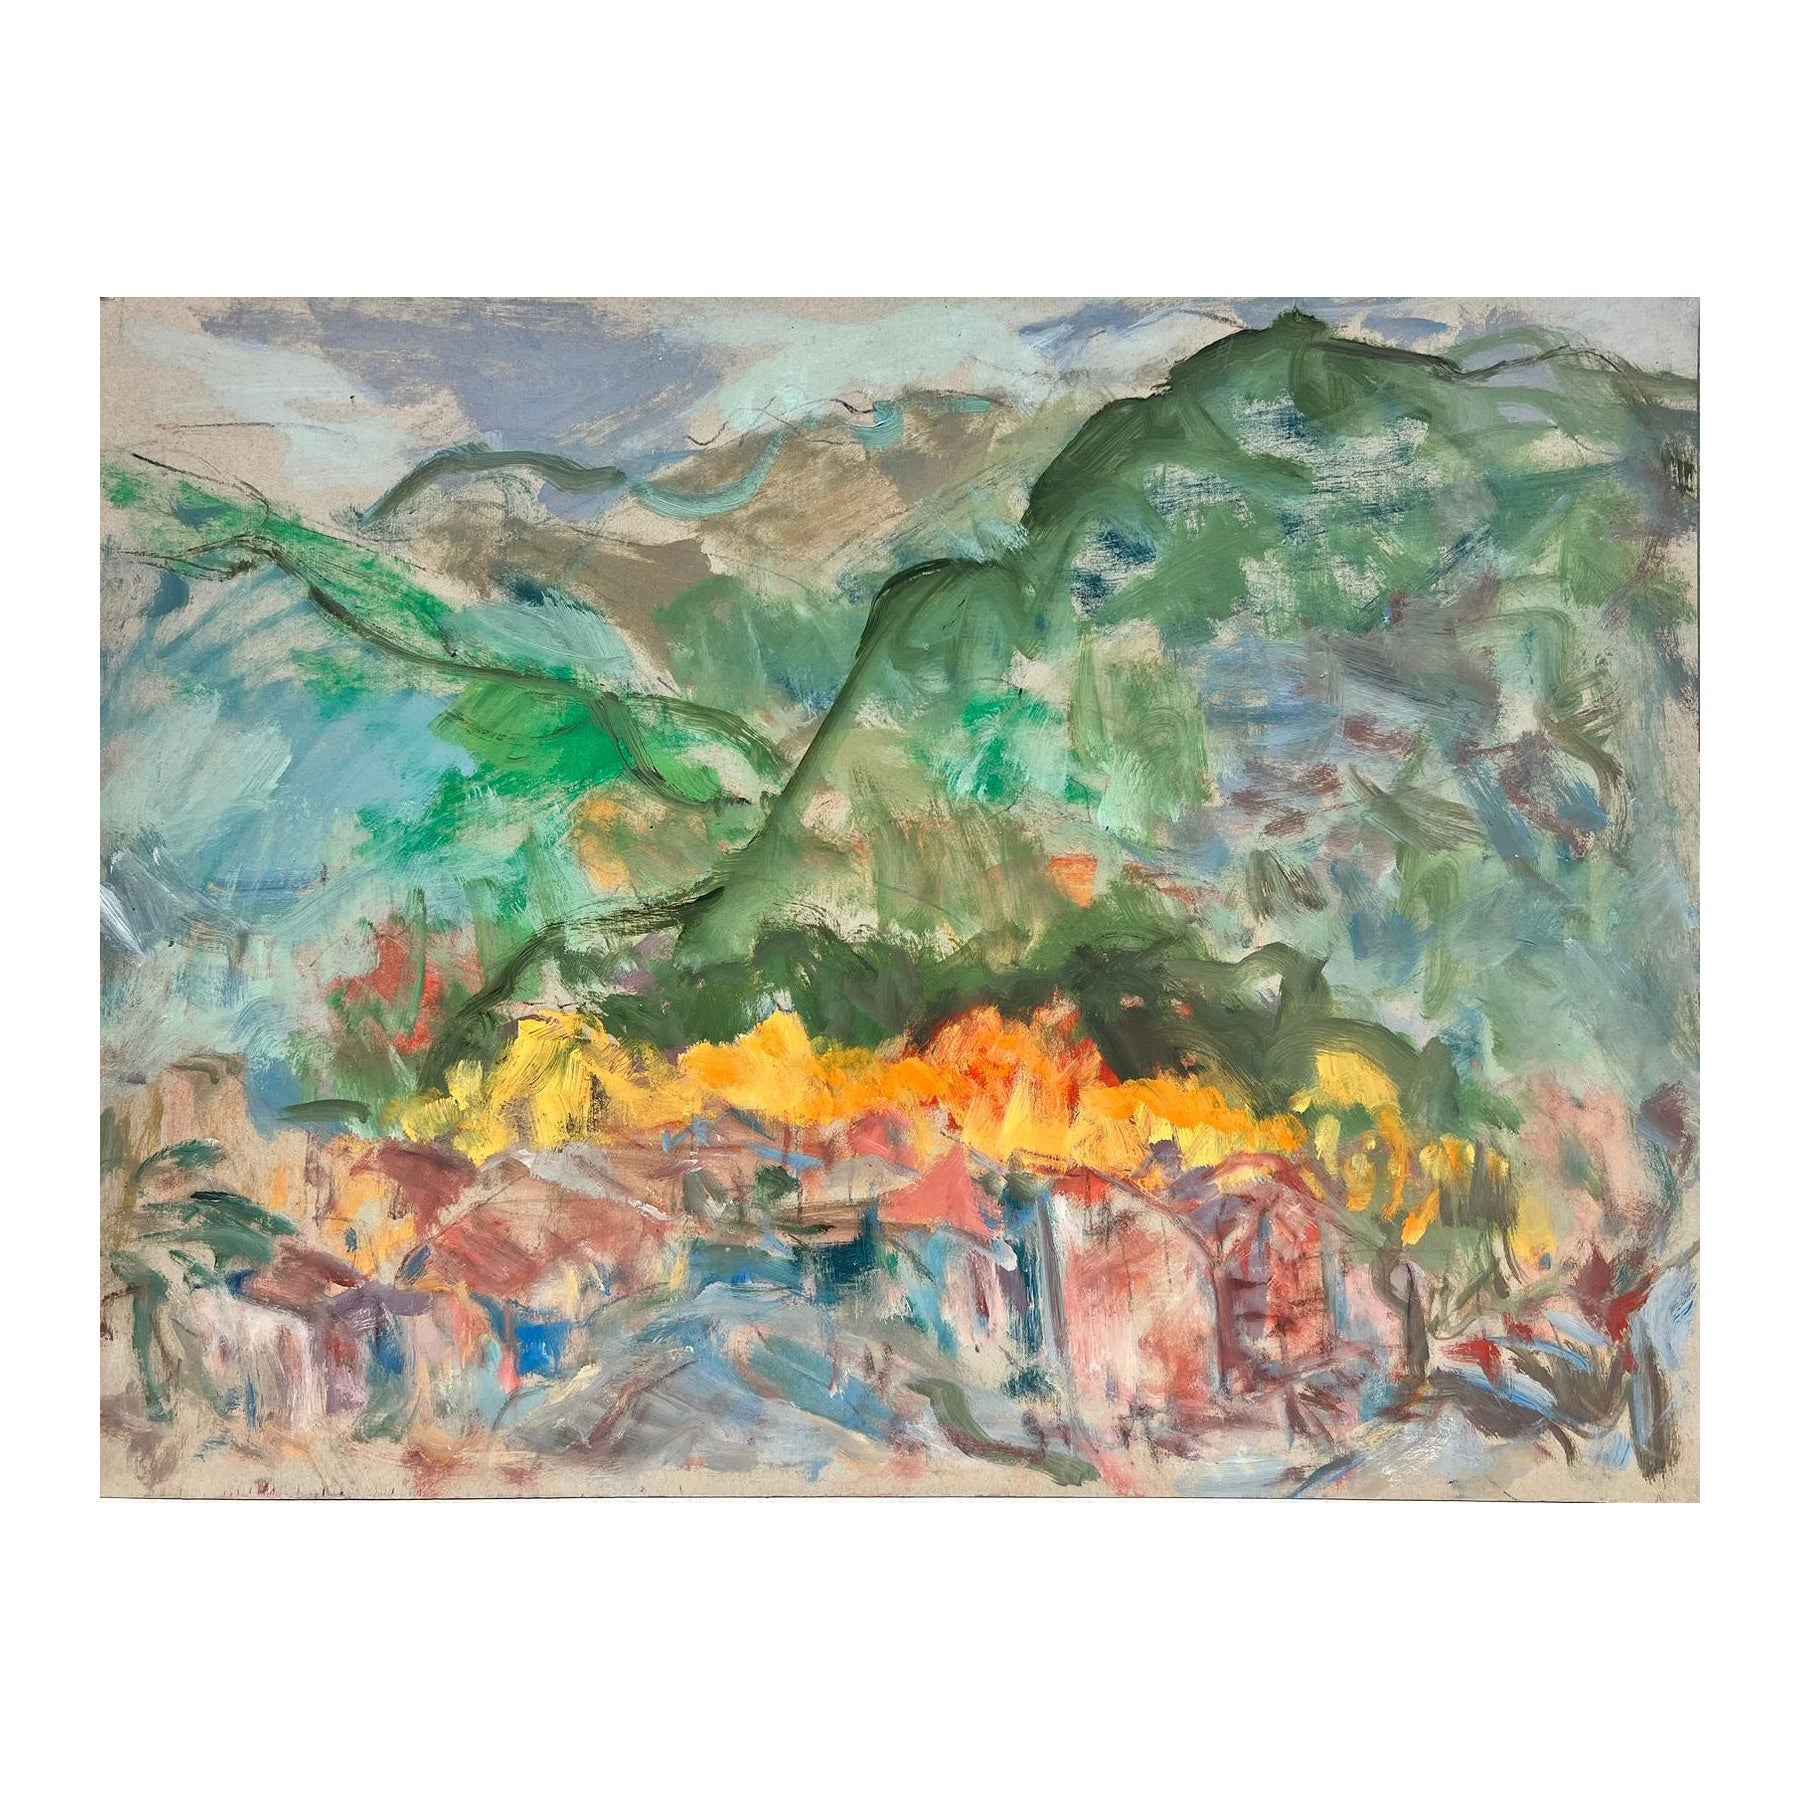 French School Landscape Painting - 20th Century French Expressionist Provencal Landscape Green Hills & Town